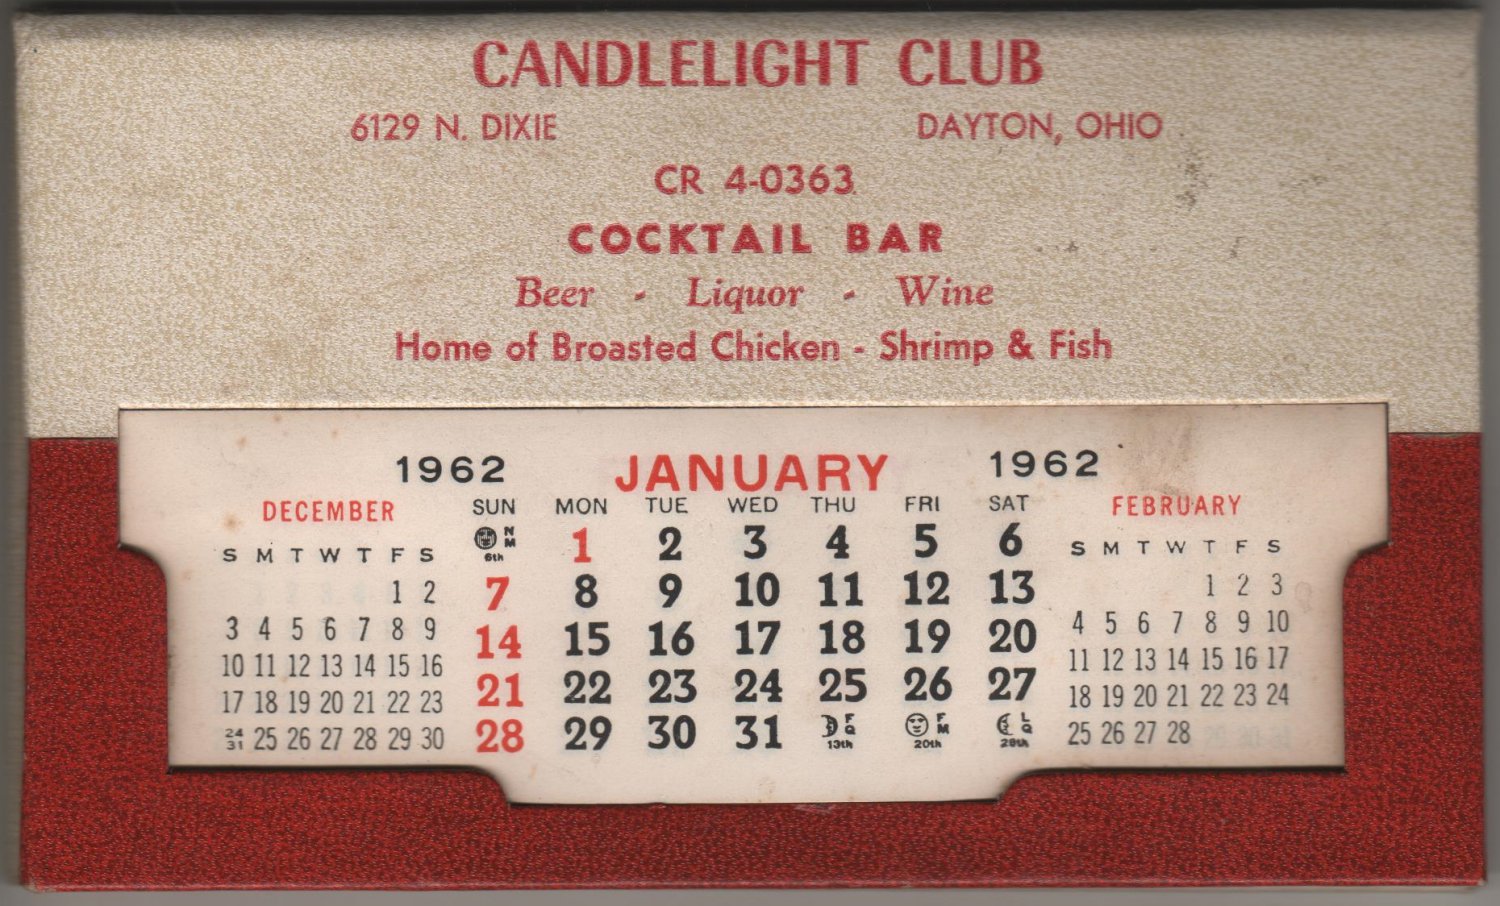 Candlelight Club Cocktail Bar Calendar Giveaway, Dayton Ohio, Red